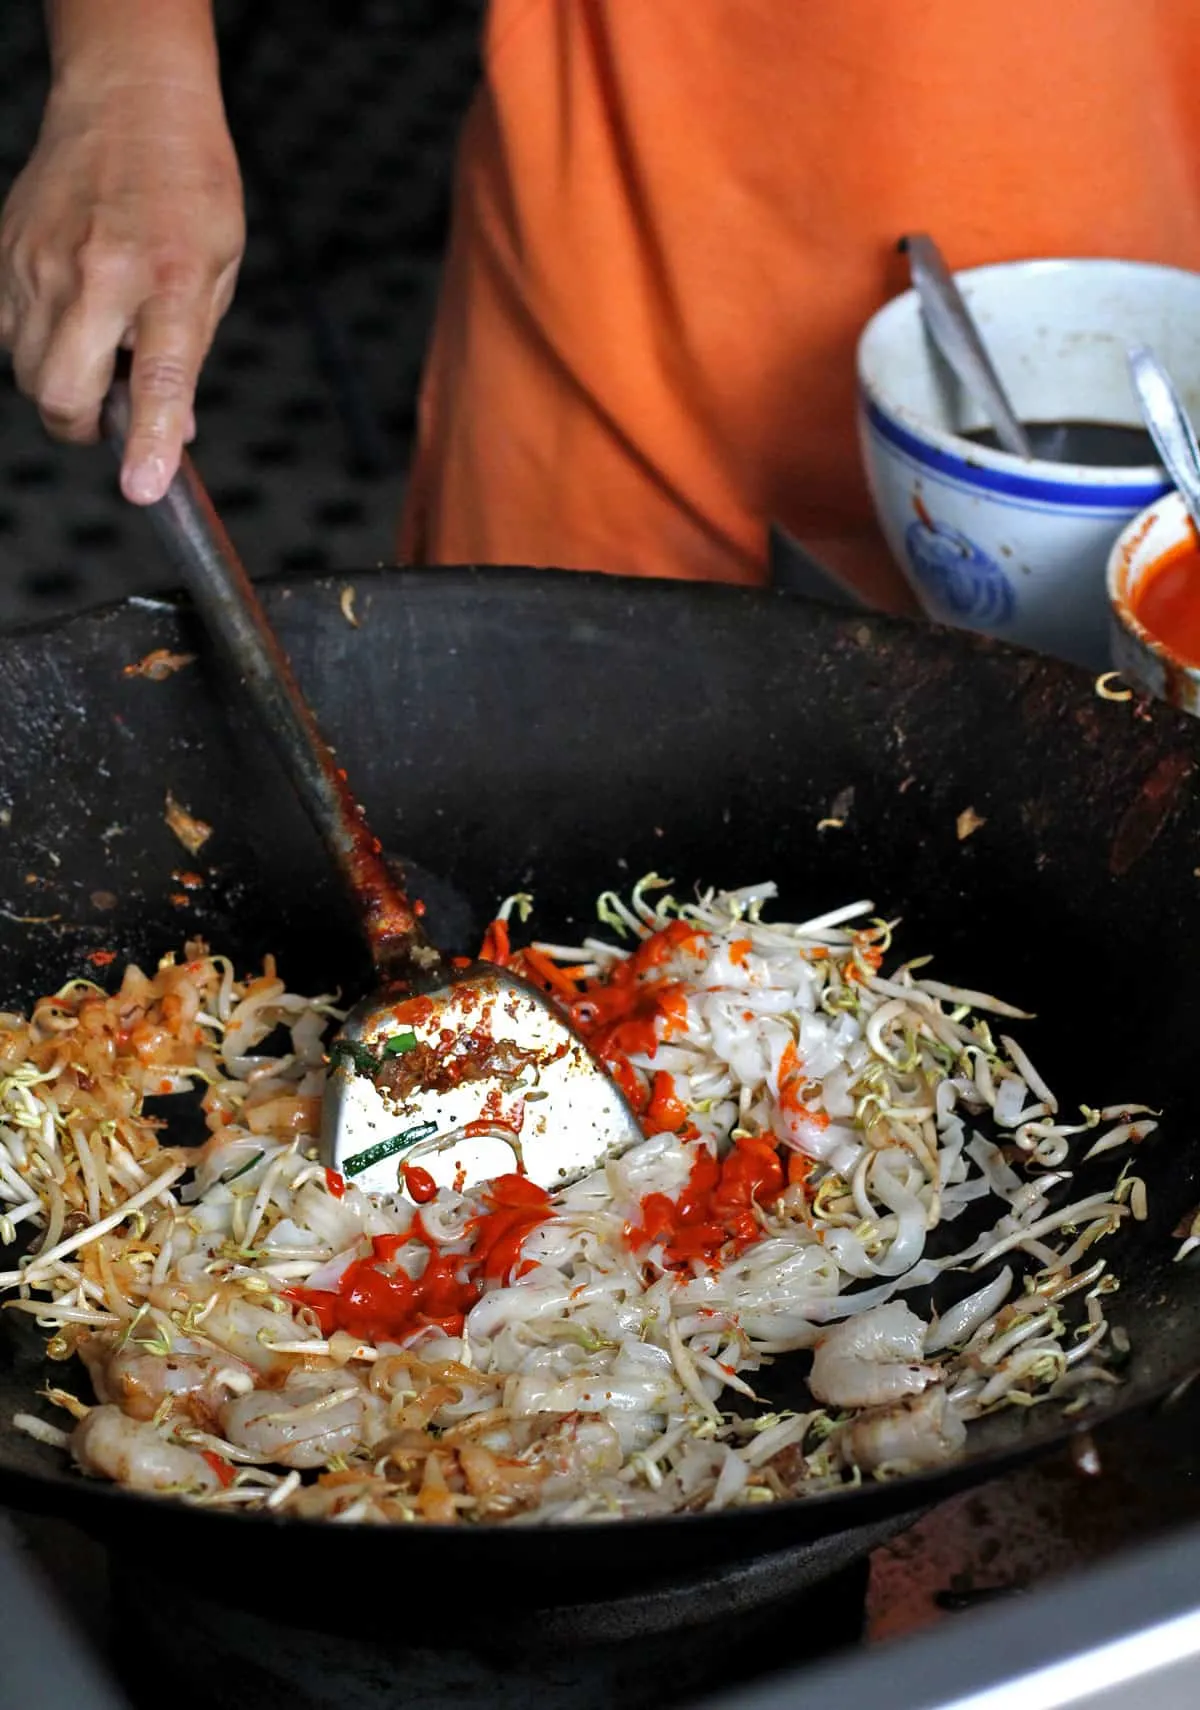 Cooking char koay teow in Penang, Malaysia